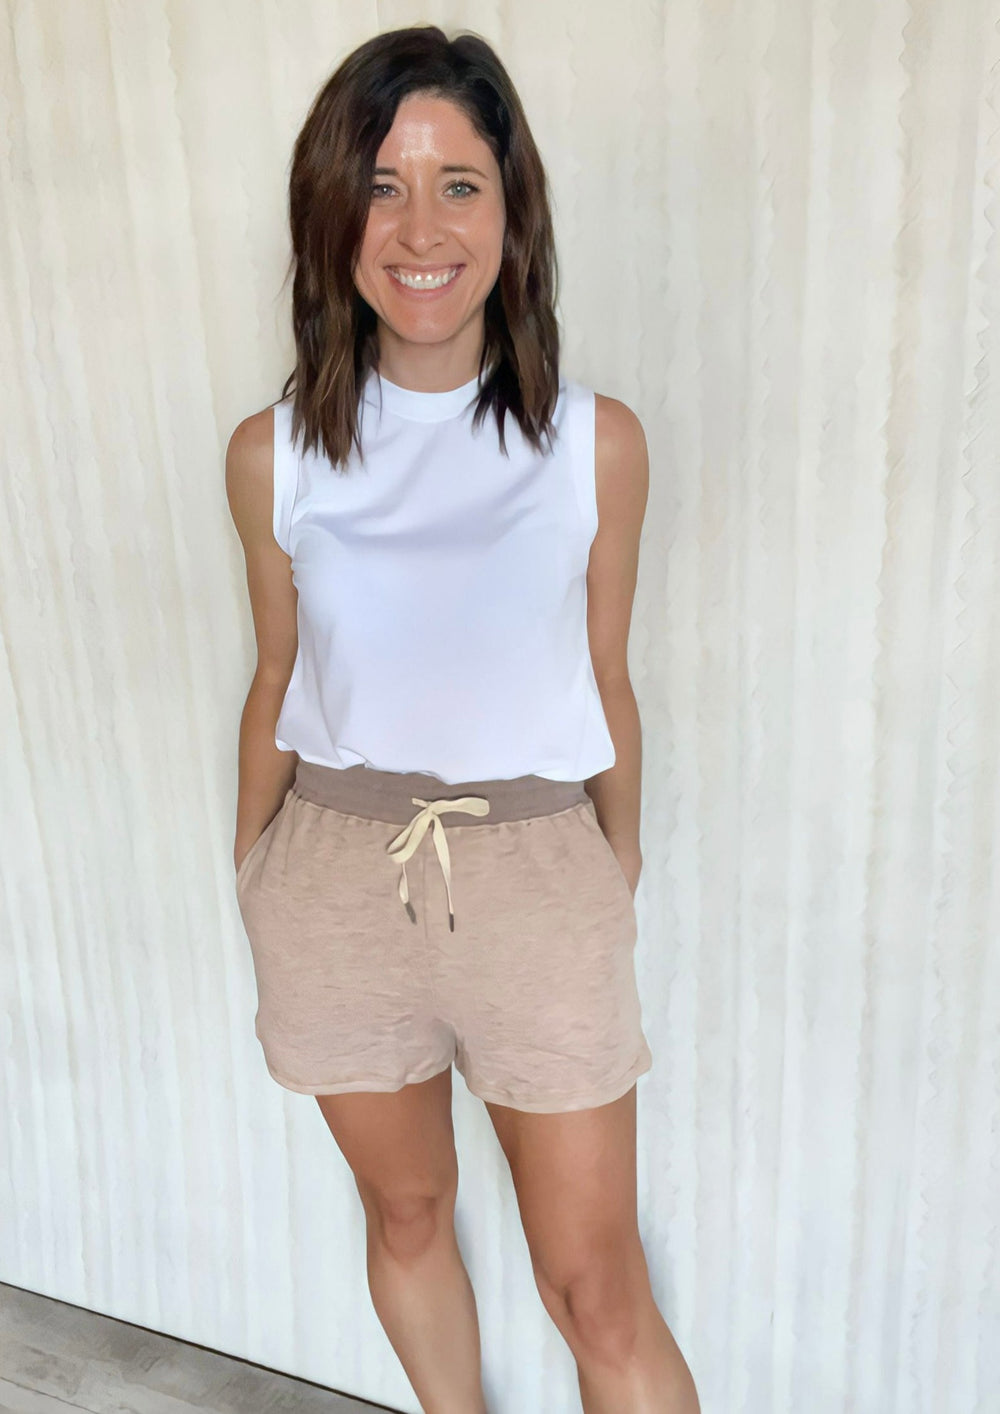 Comfy Lounge shorts in a blush-taupe color with drawstring and stretchy waist. Feel like terry sweatpants.